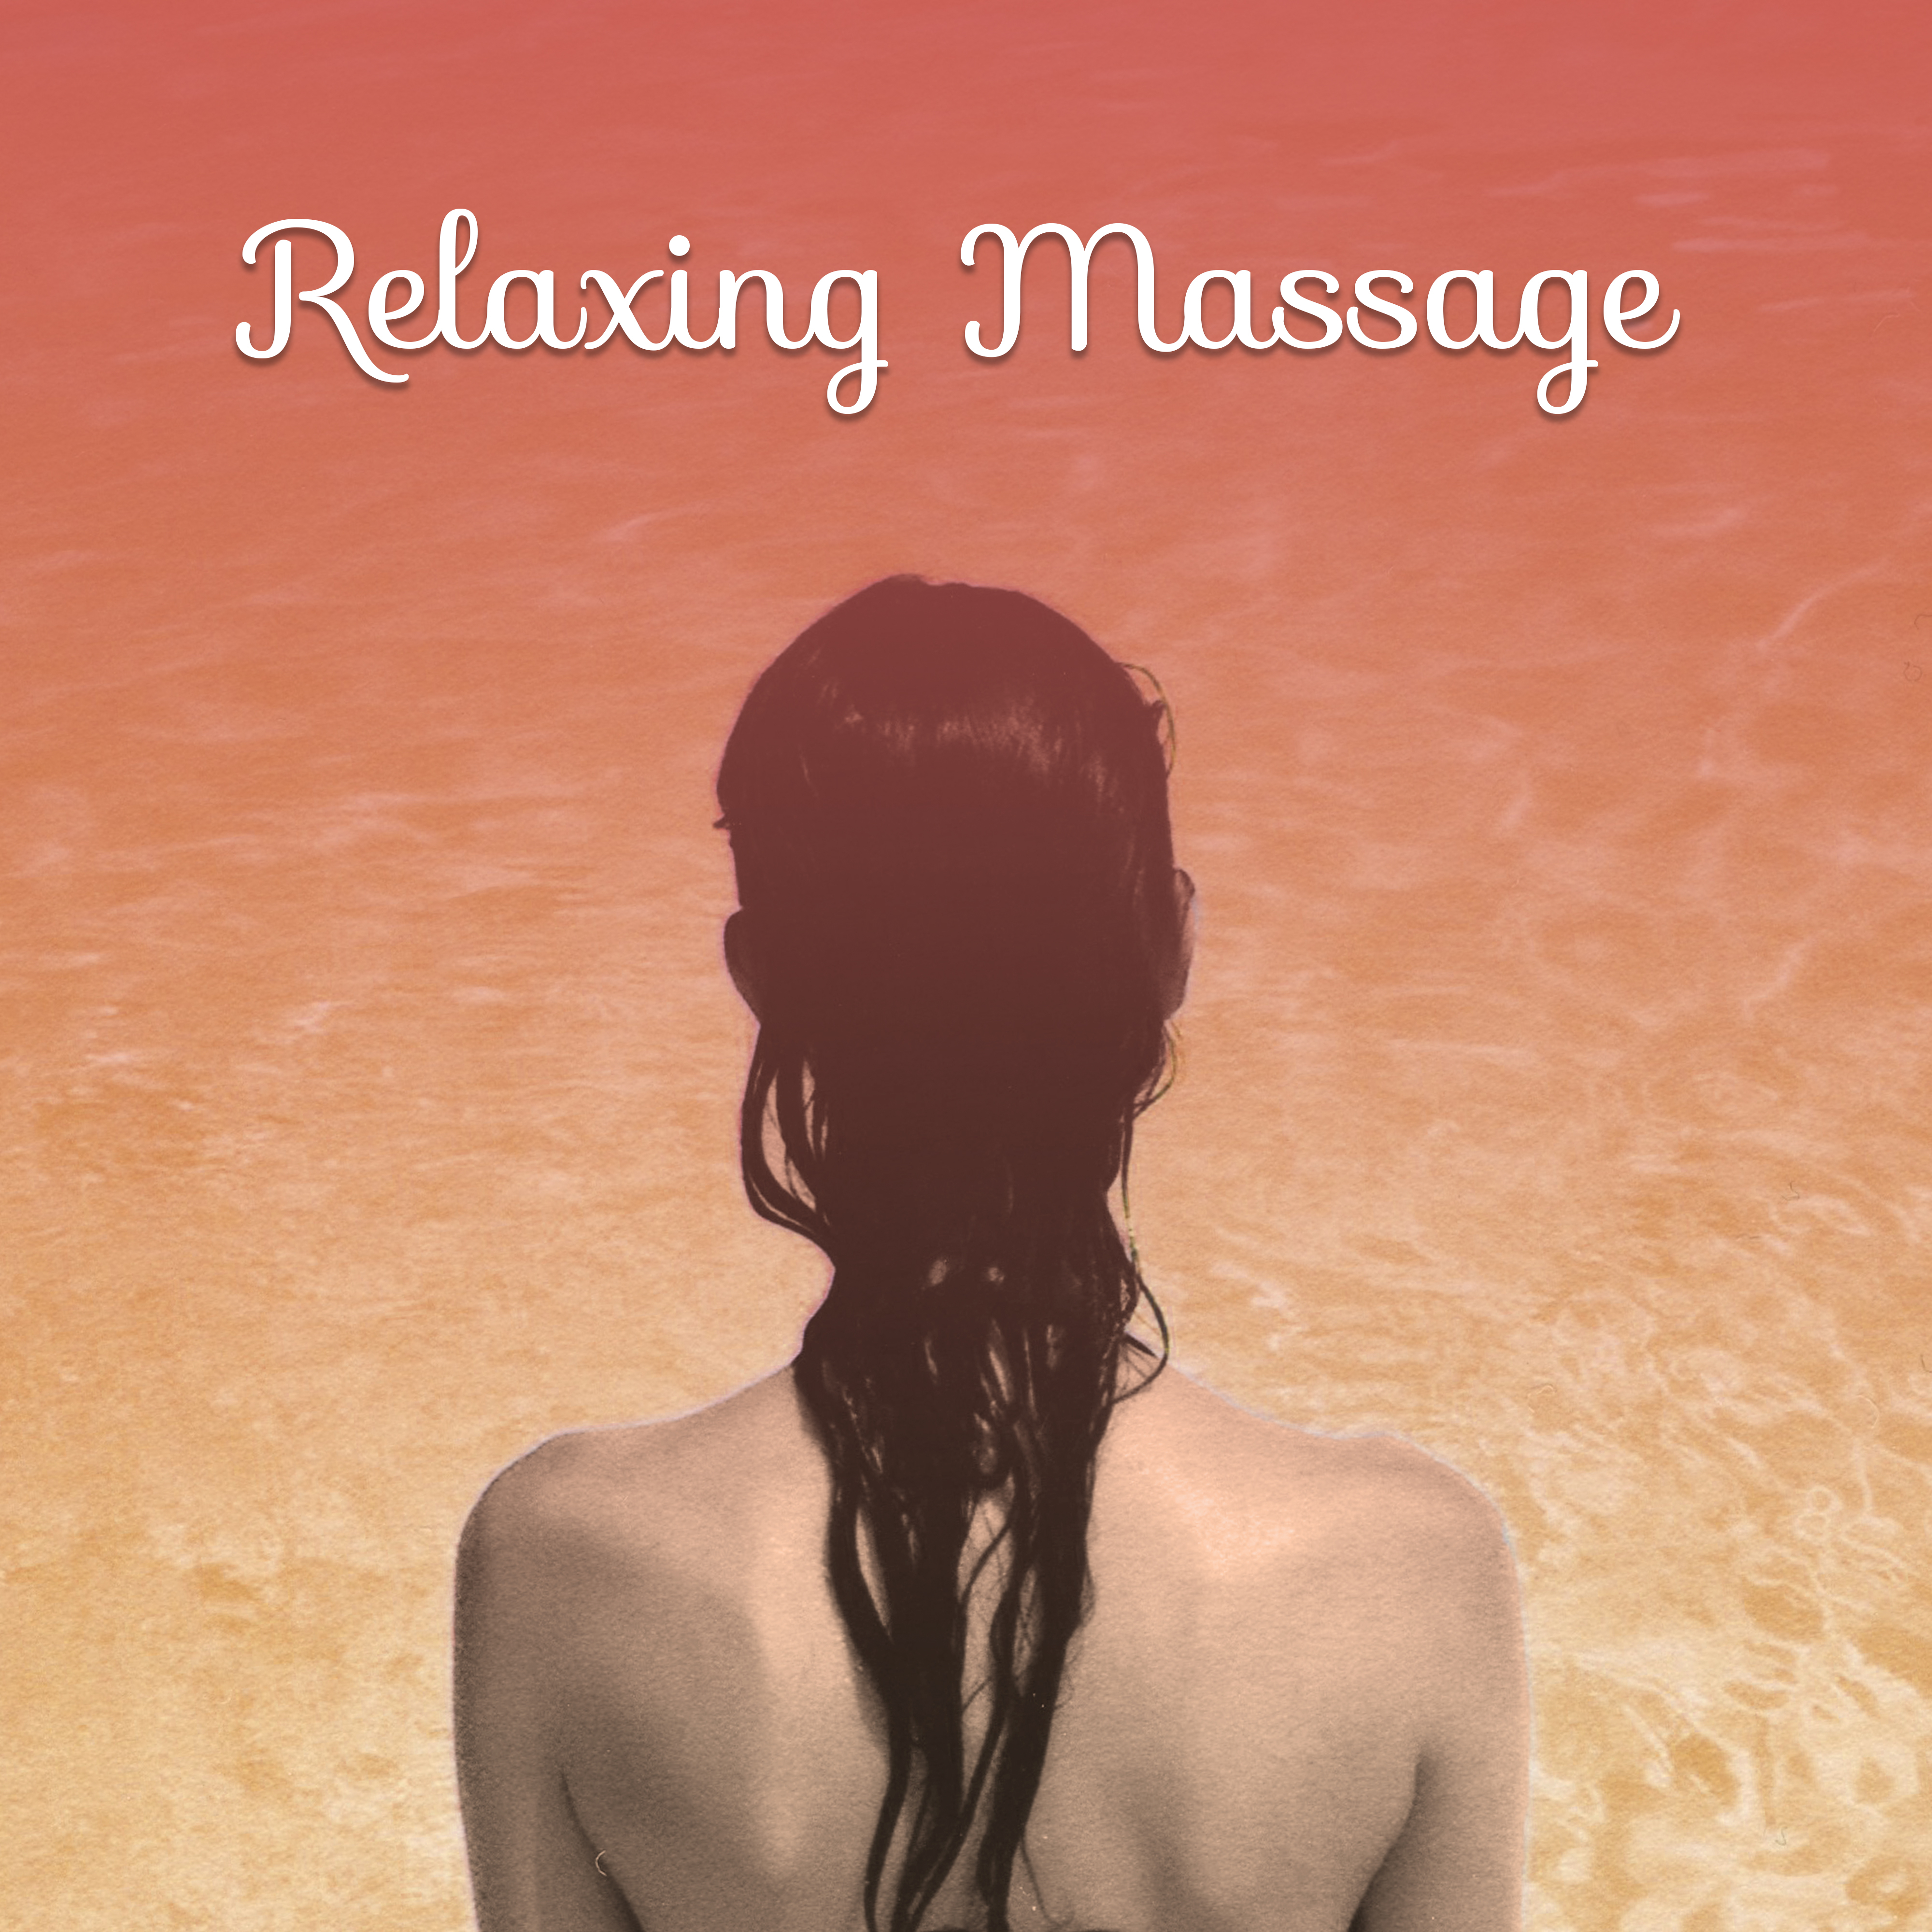 Relaxing Massage – Soothing Nature Sounds, Relax, Spa, Music for Hotel Spa, Beauty Parlour, Home Spa, Bath Time